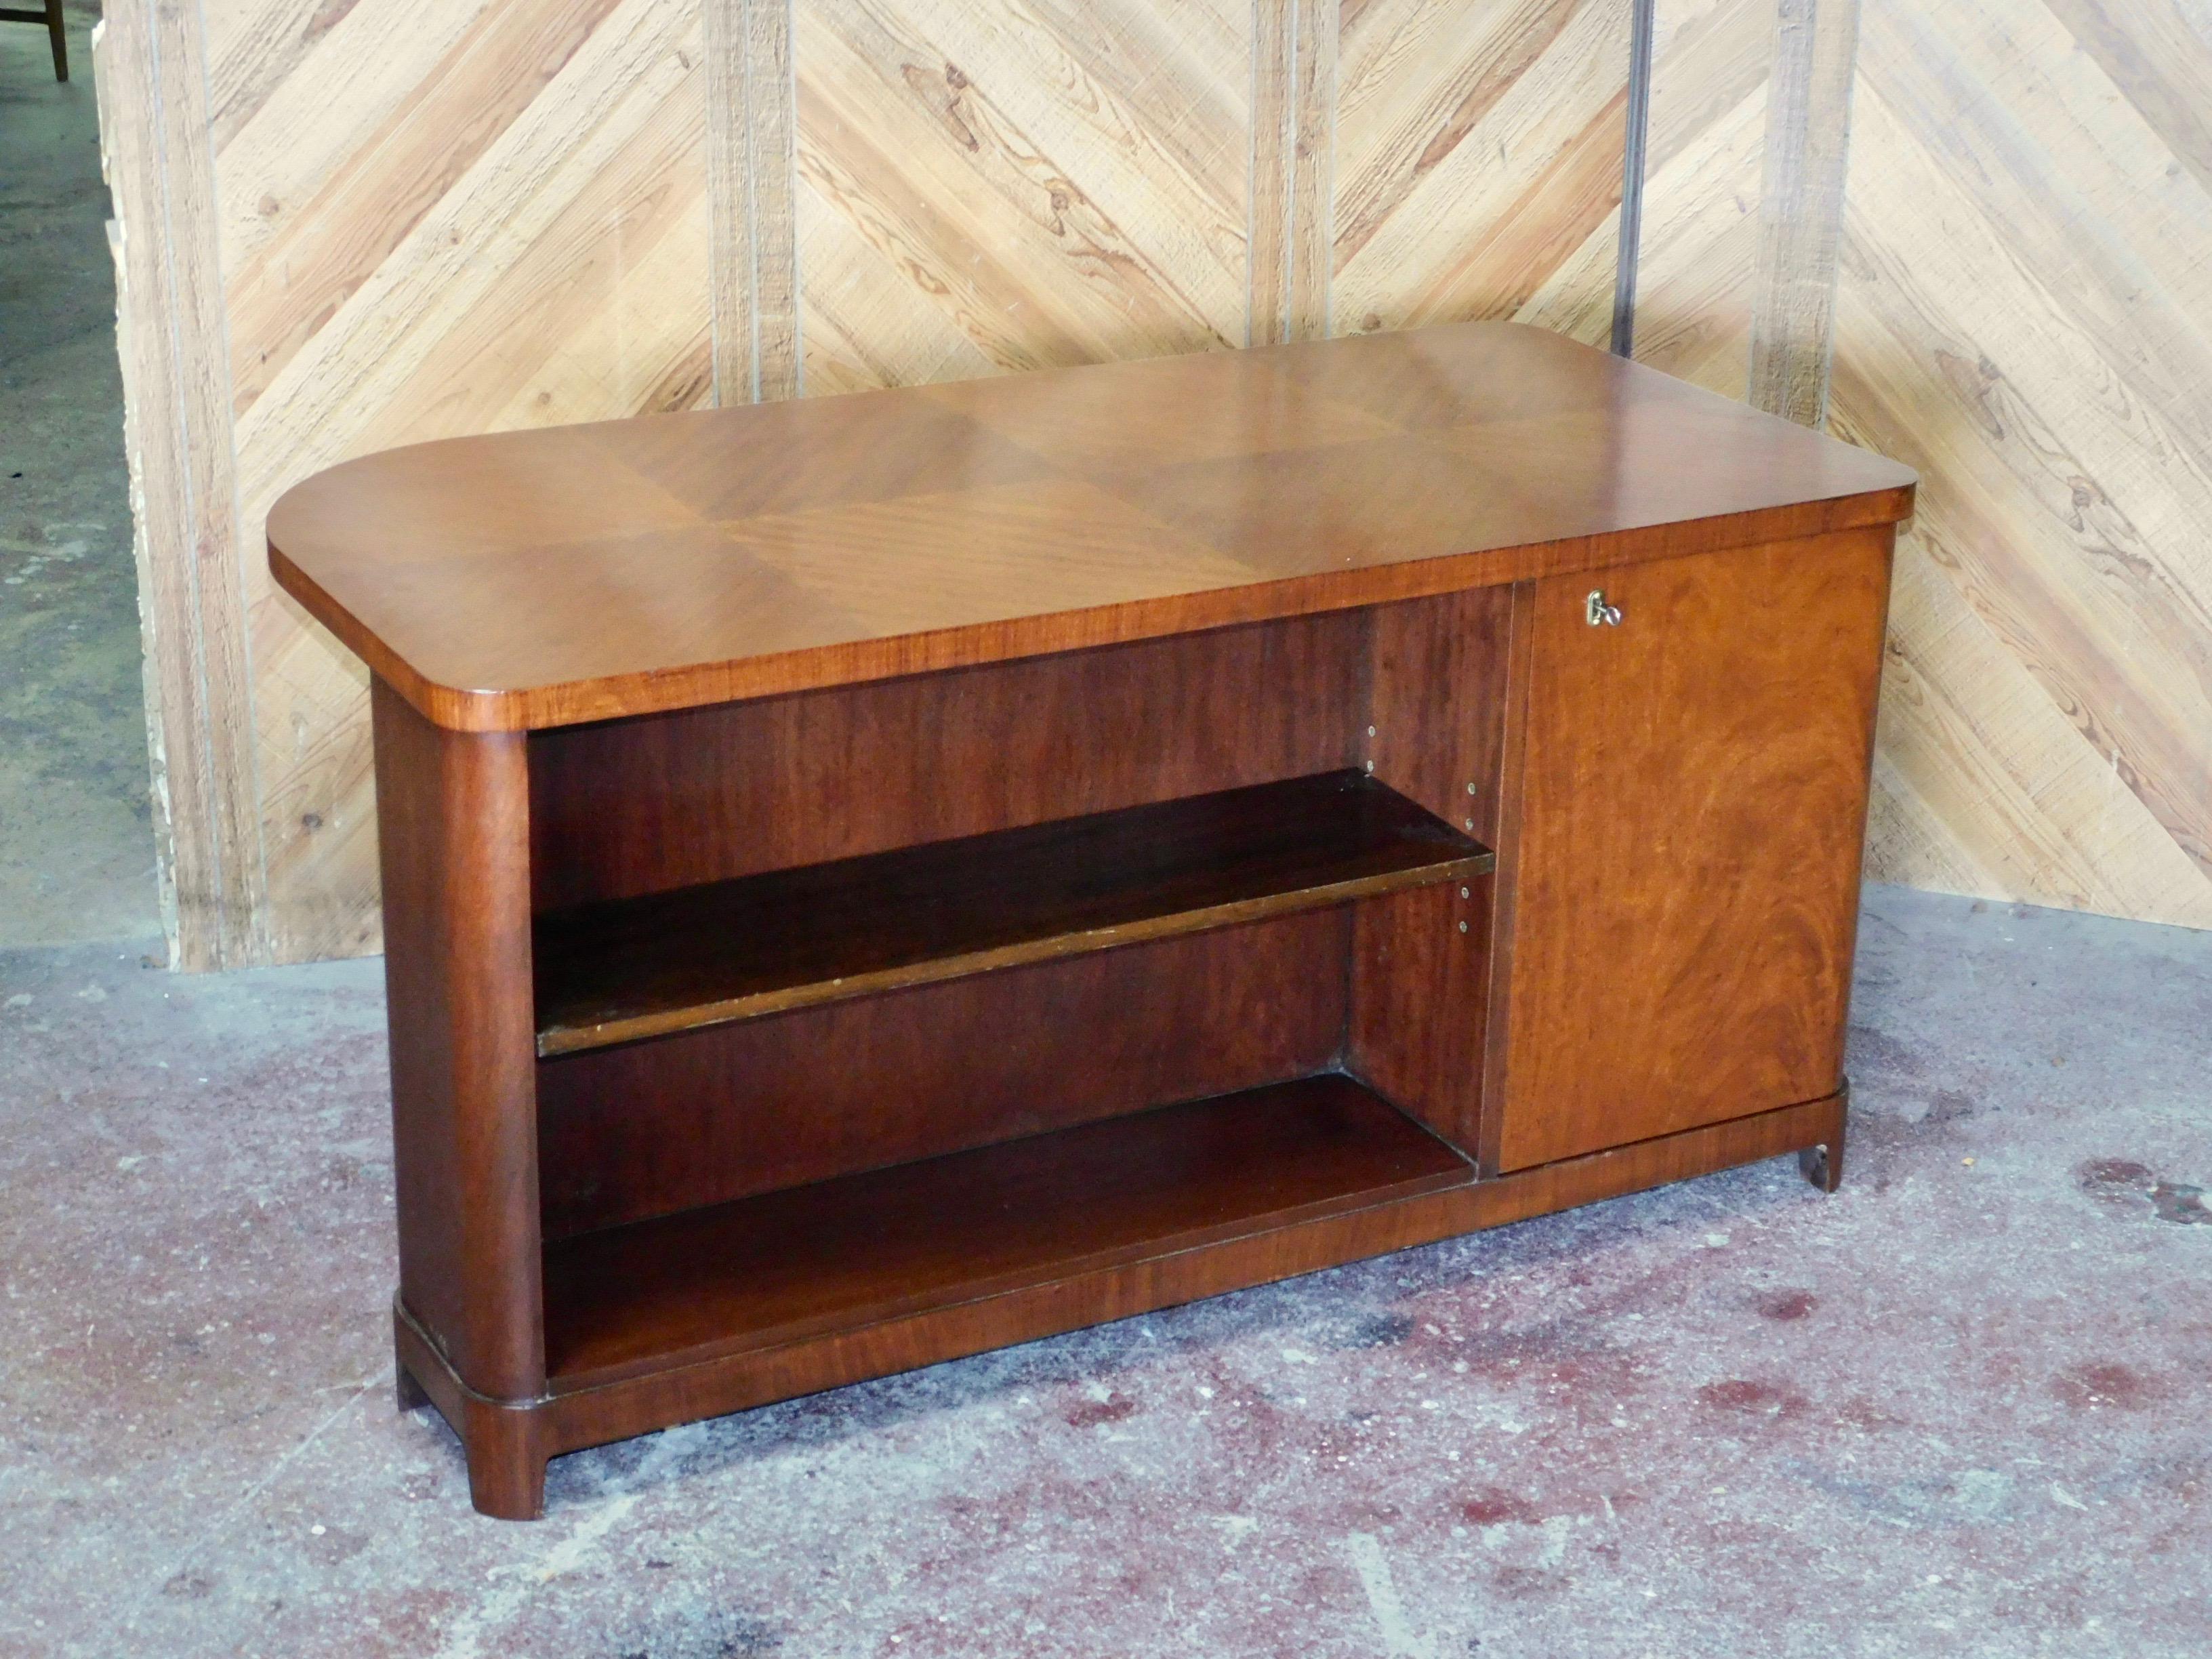 Swedish art moderne desk rendered in bookmatched flame mahogany. With built in book case at back. With multiple interior drawers. With original key. In impeccable restored condition with original key.